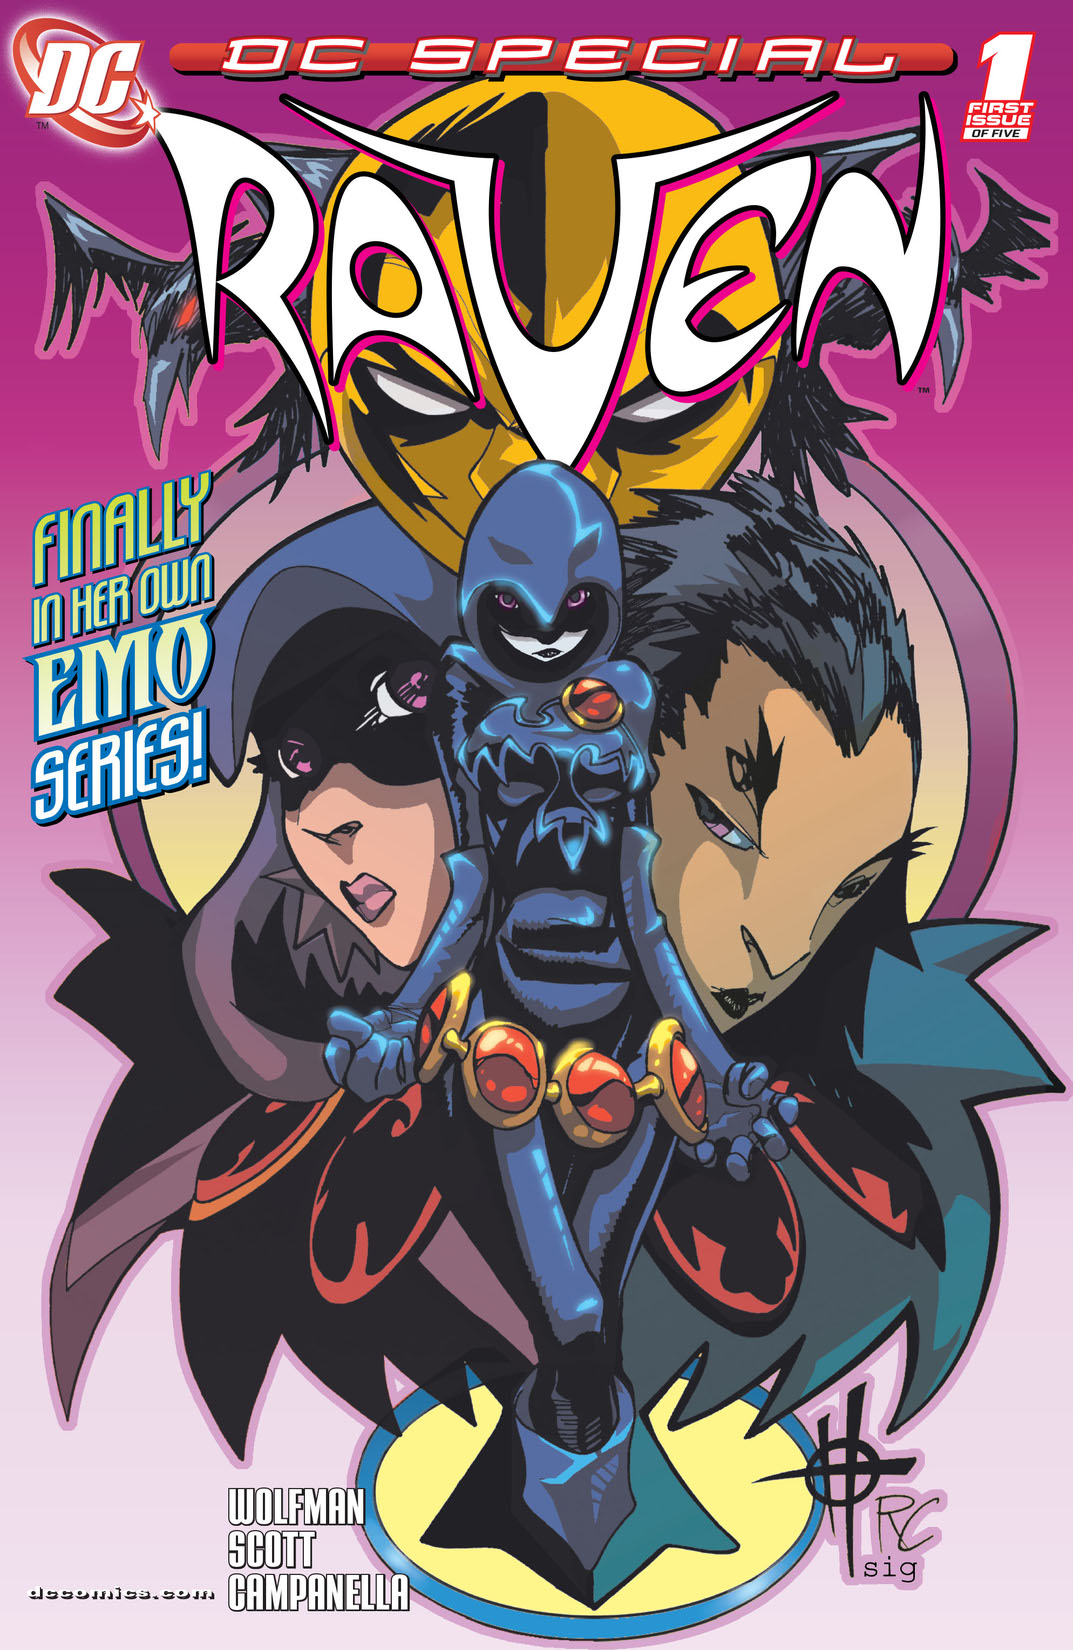 DC Special Raven #1 preview images